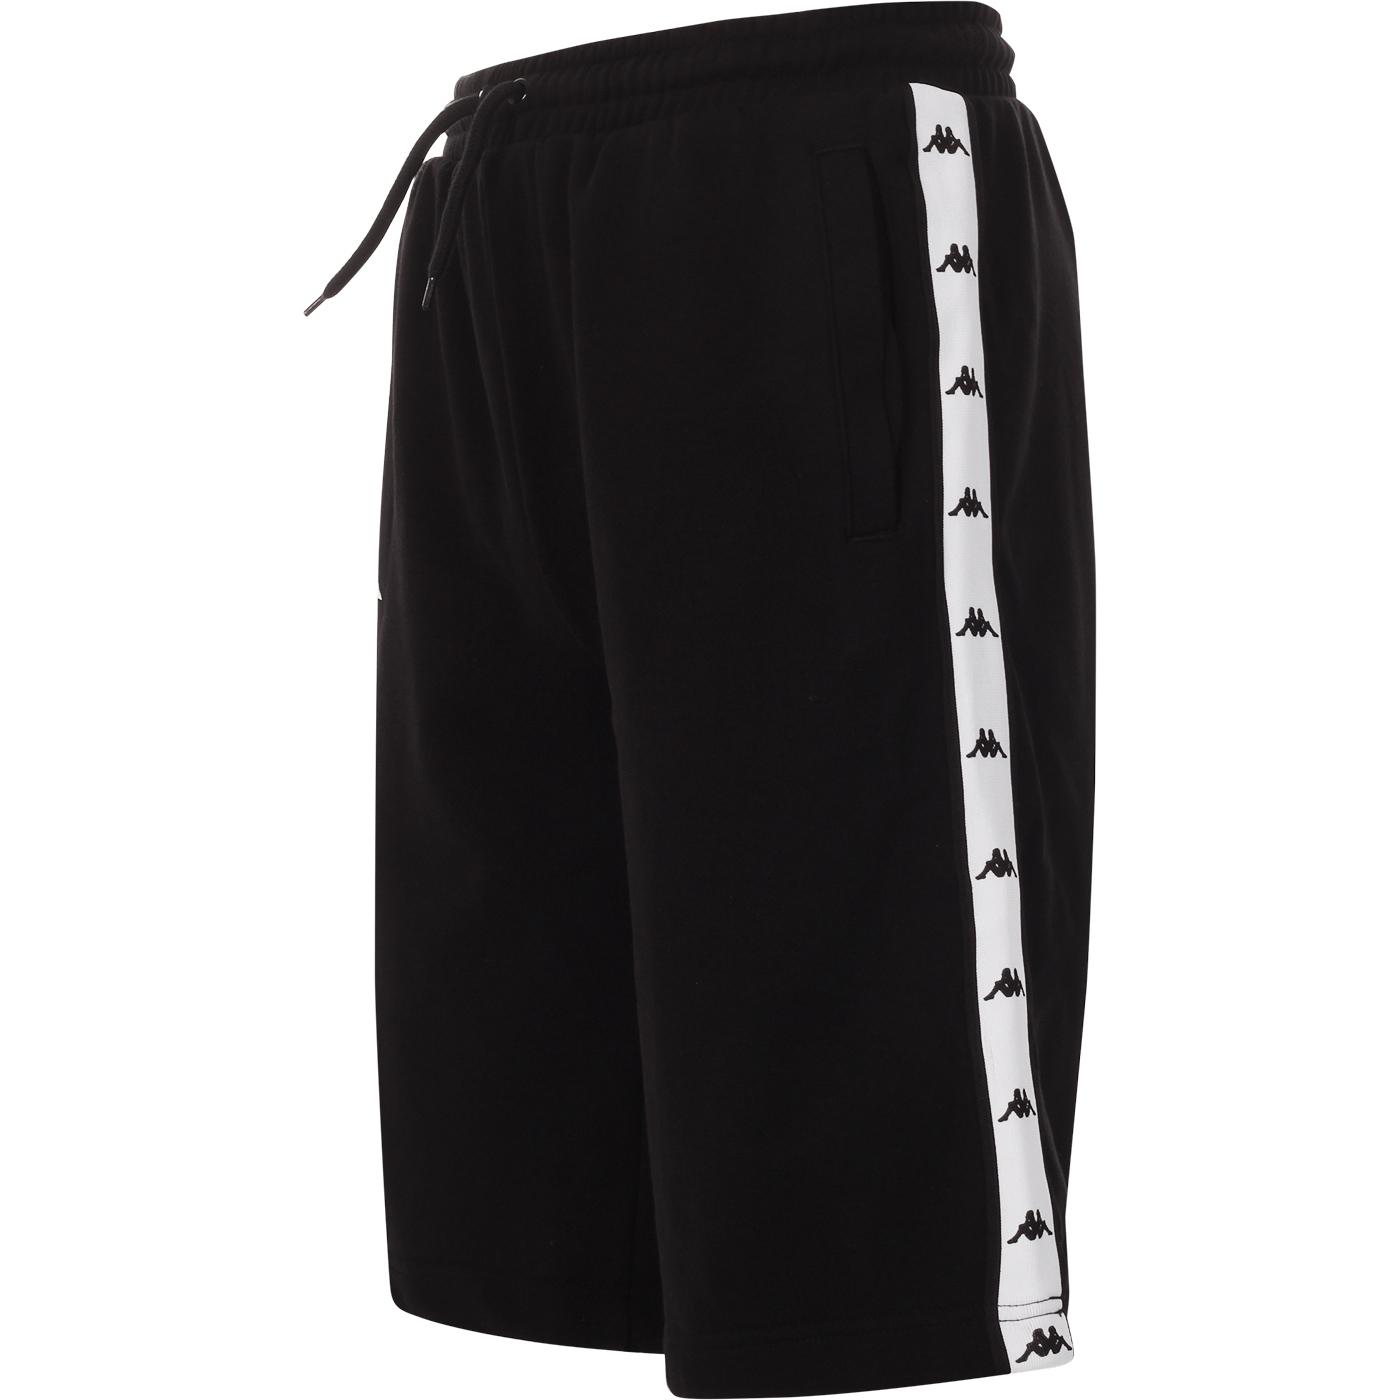 KAPPA Tunner 90s Mid Length Wide Cut Shorts in Black/White